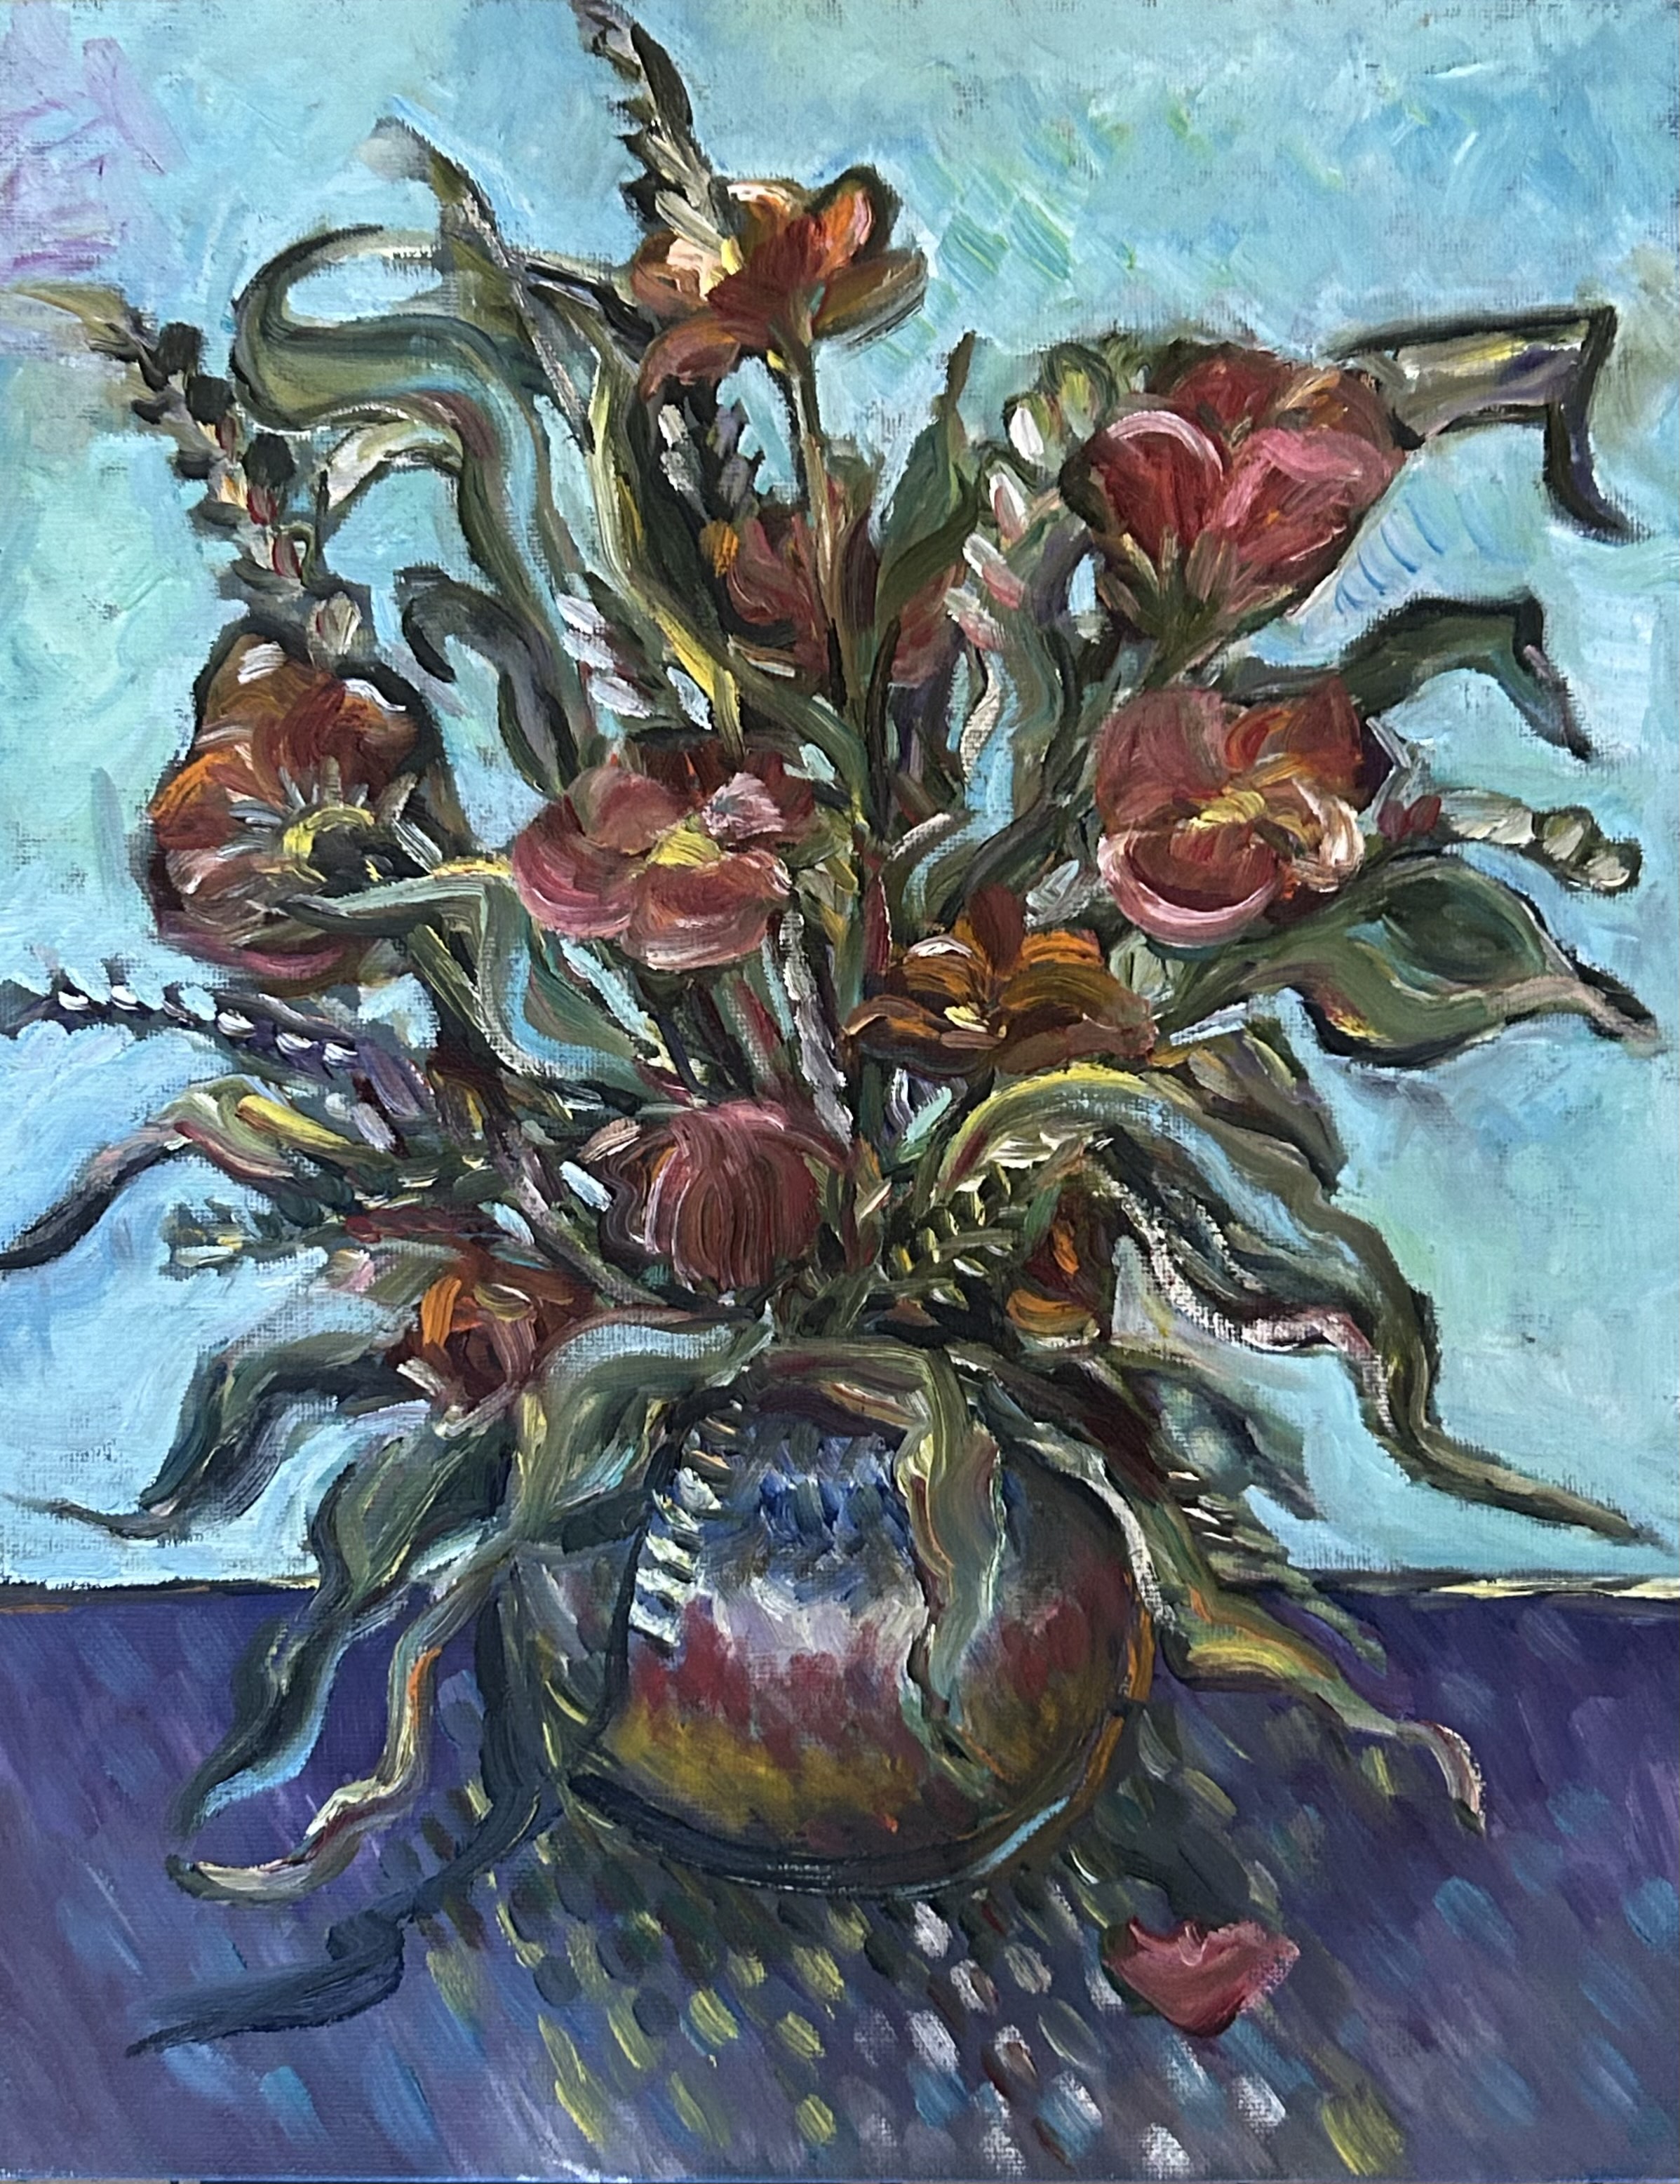 The painting “Red Floral” by Leisa Rowley